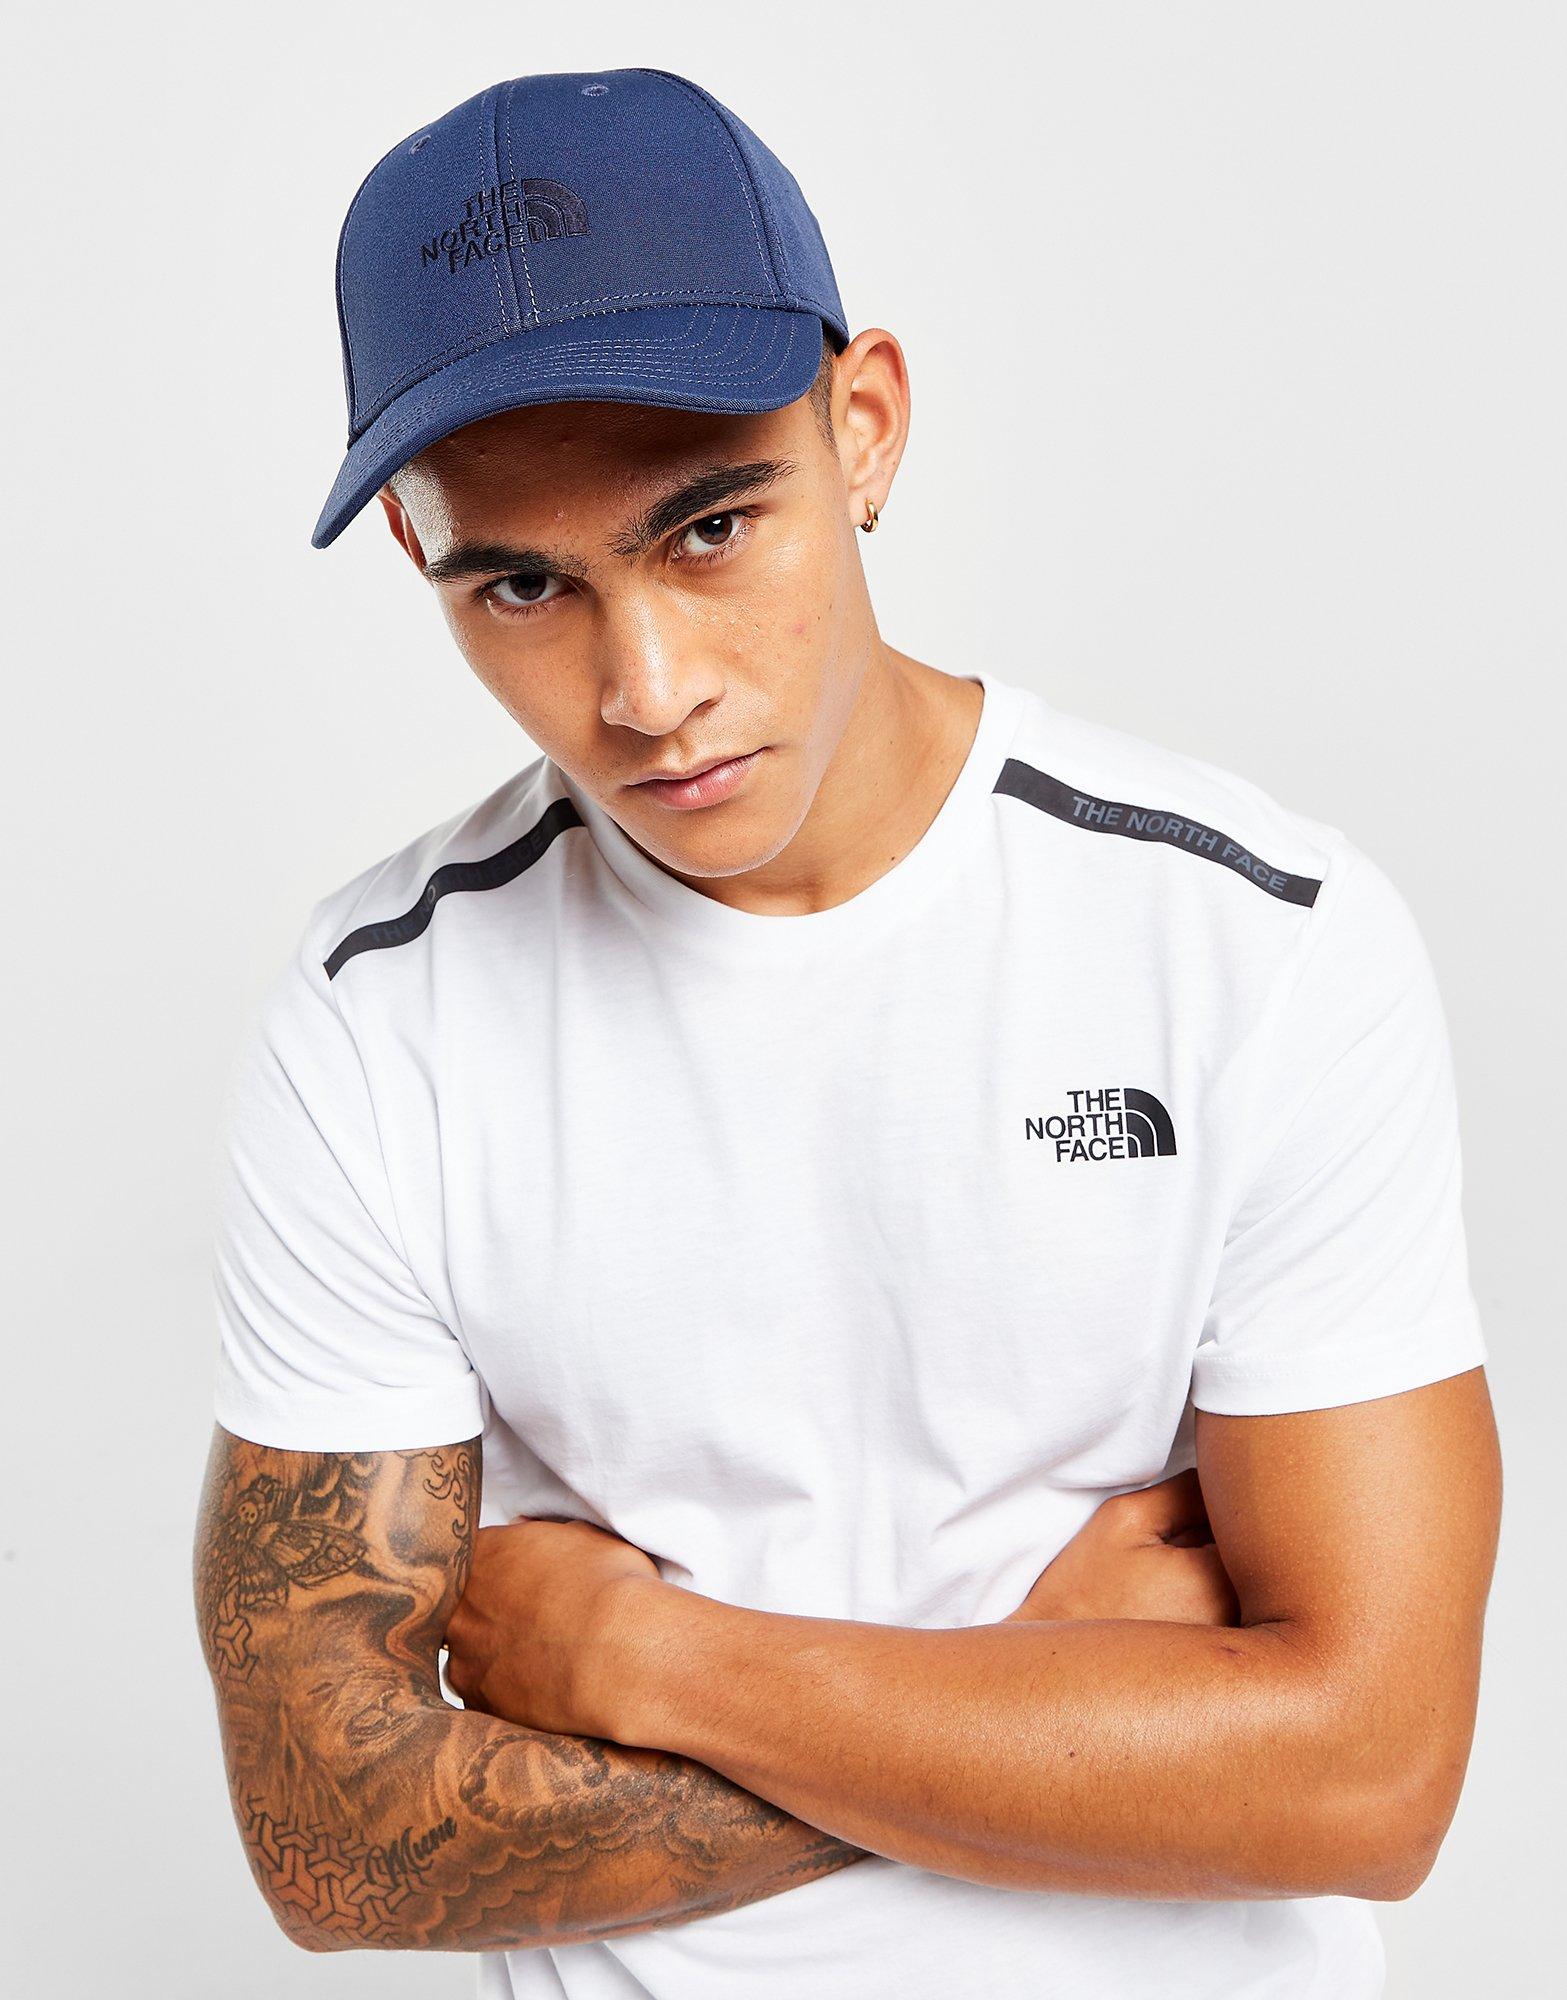 jeans Zullen Verwaand Blue The North Face Recycled '66 Classic Cap | JD Sports Global